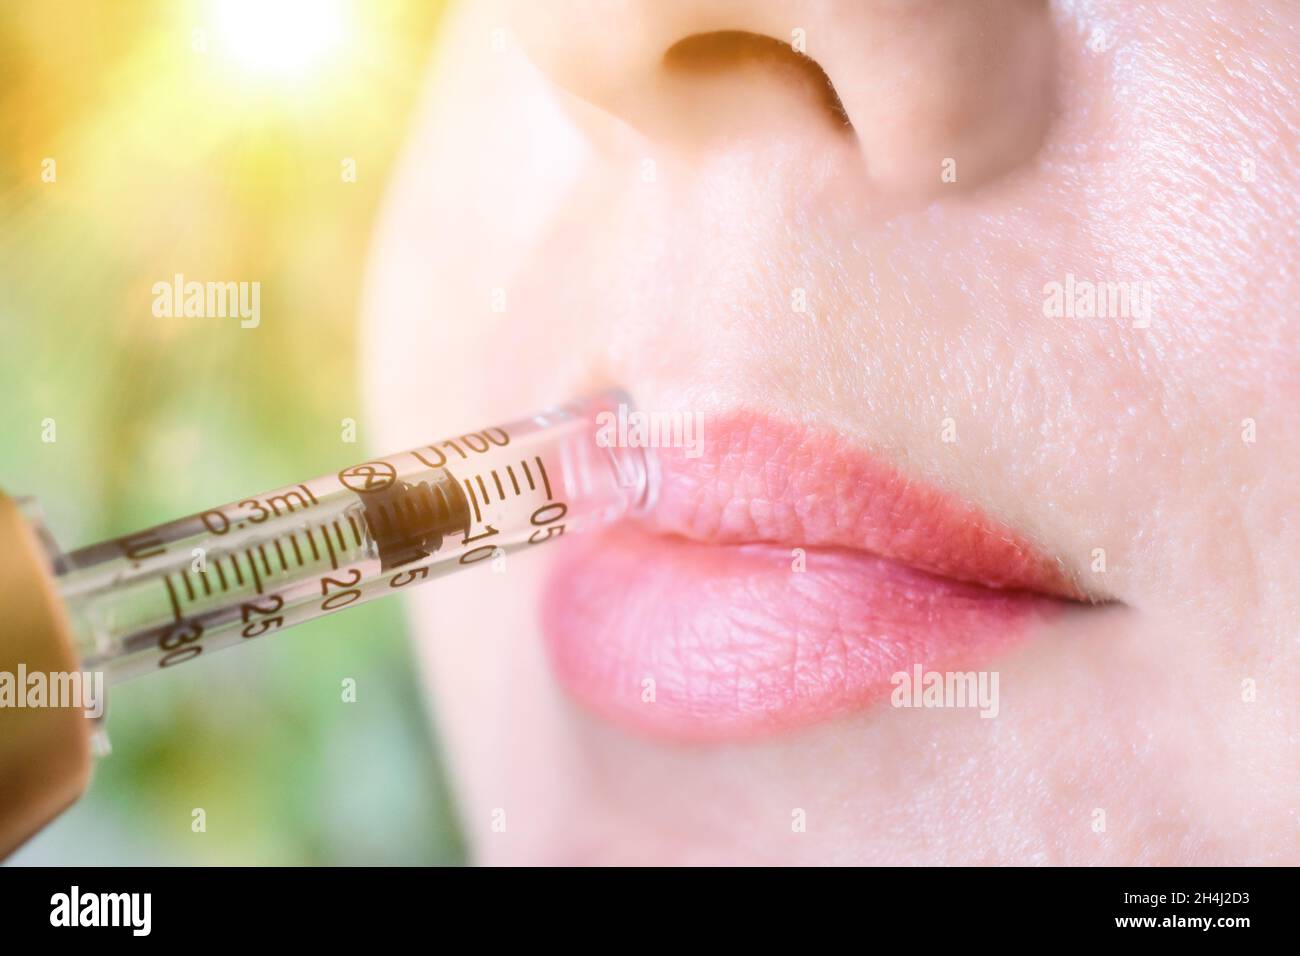 Lip augmentation treatment using needle-free mesotherapy with hyaluron pen device Stock Photo